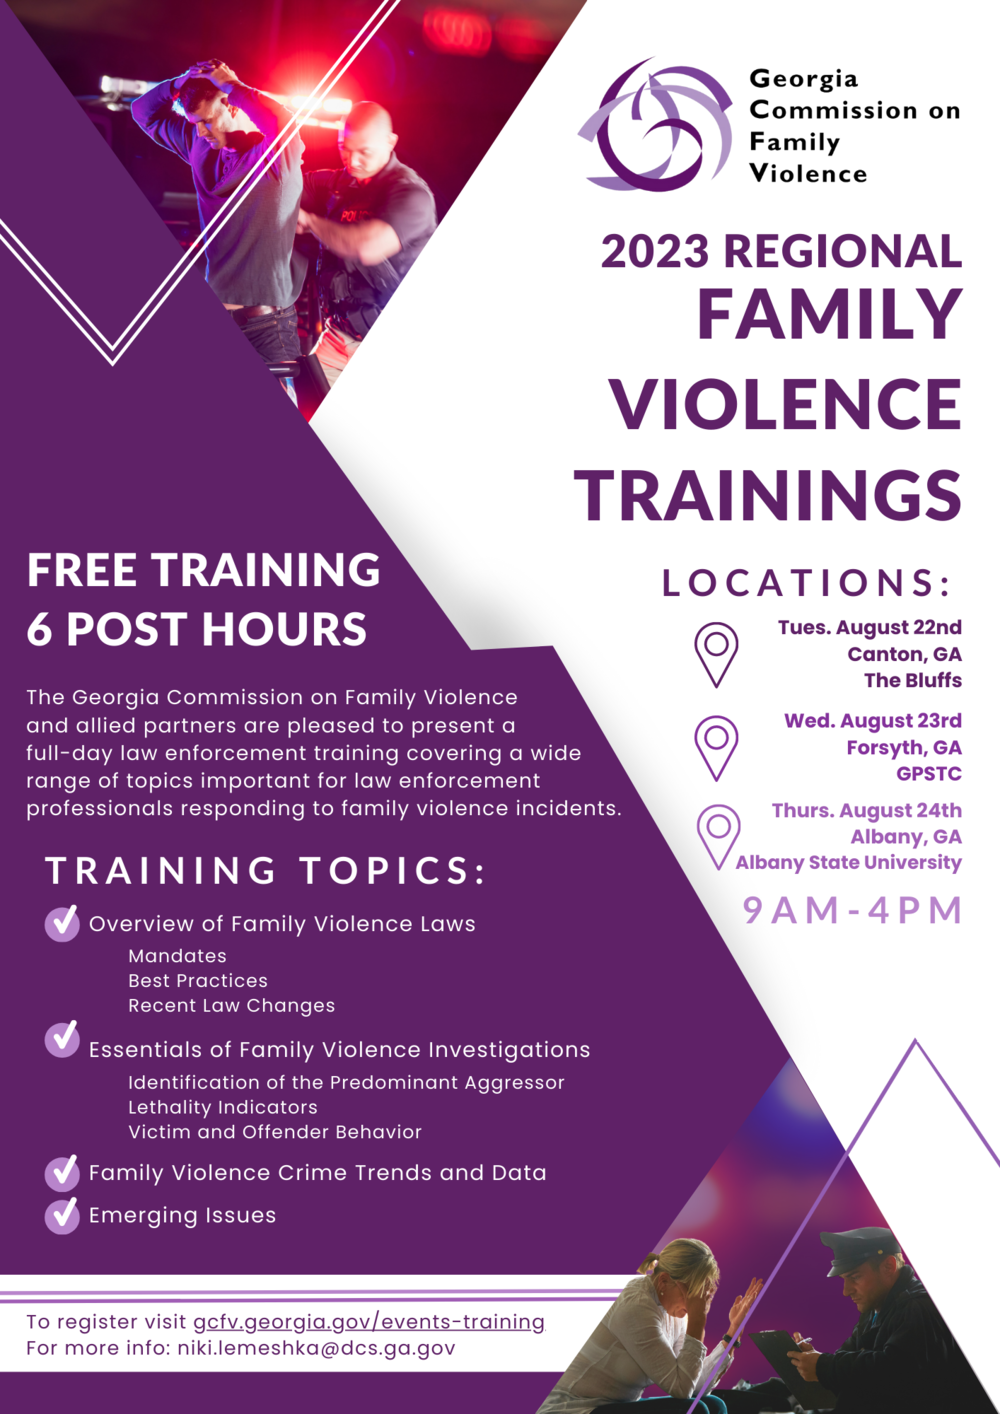 Image is of training flier for Georgia Commission on Family Violence  2023 GCFV Regional Family Violence Training. It contains text also contained on this website, as well as images of a person being arrested and a person being interviewed by police officers.